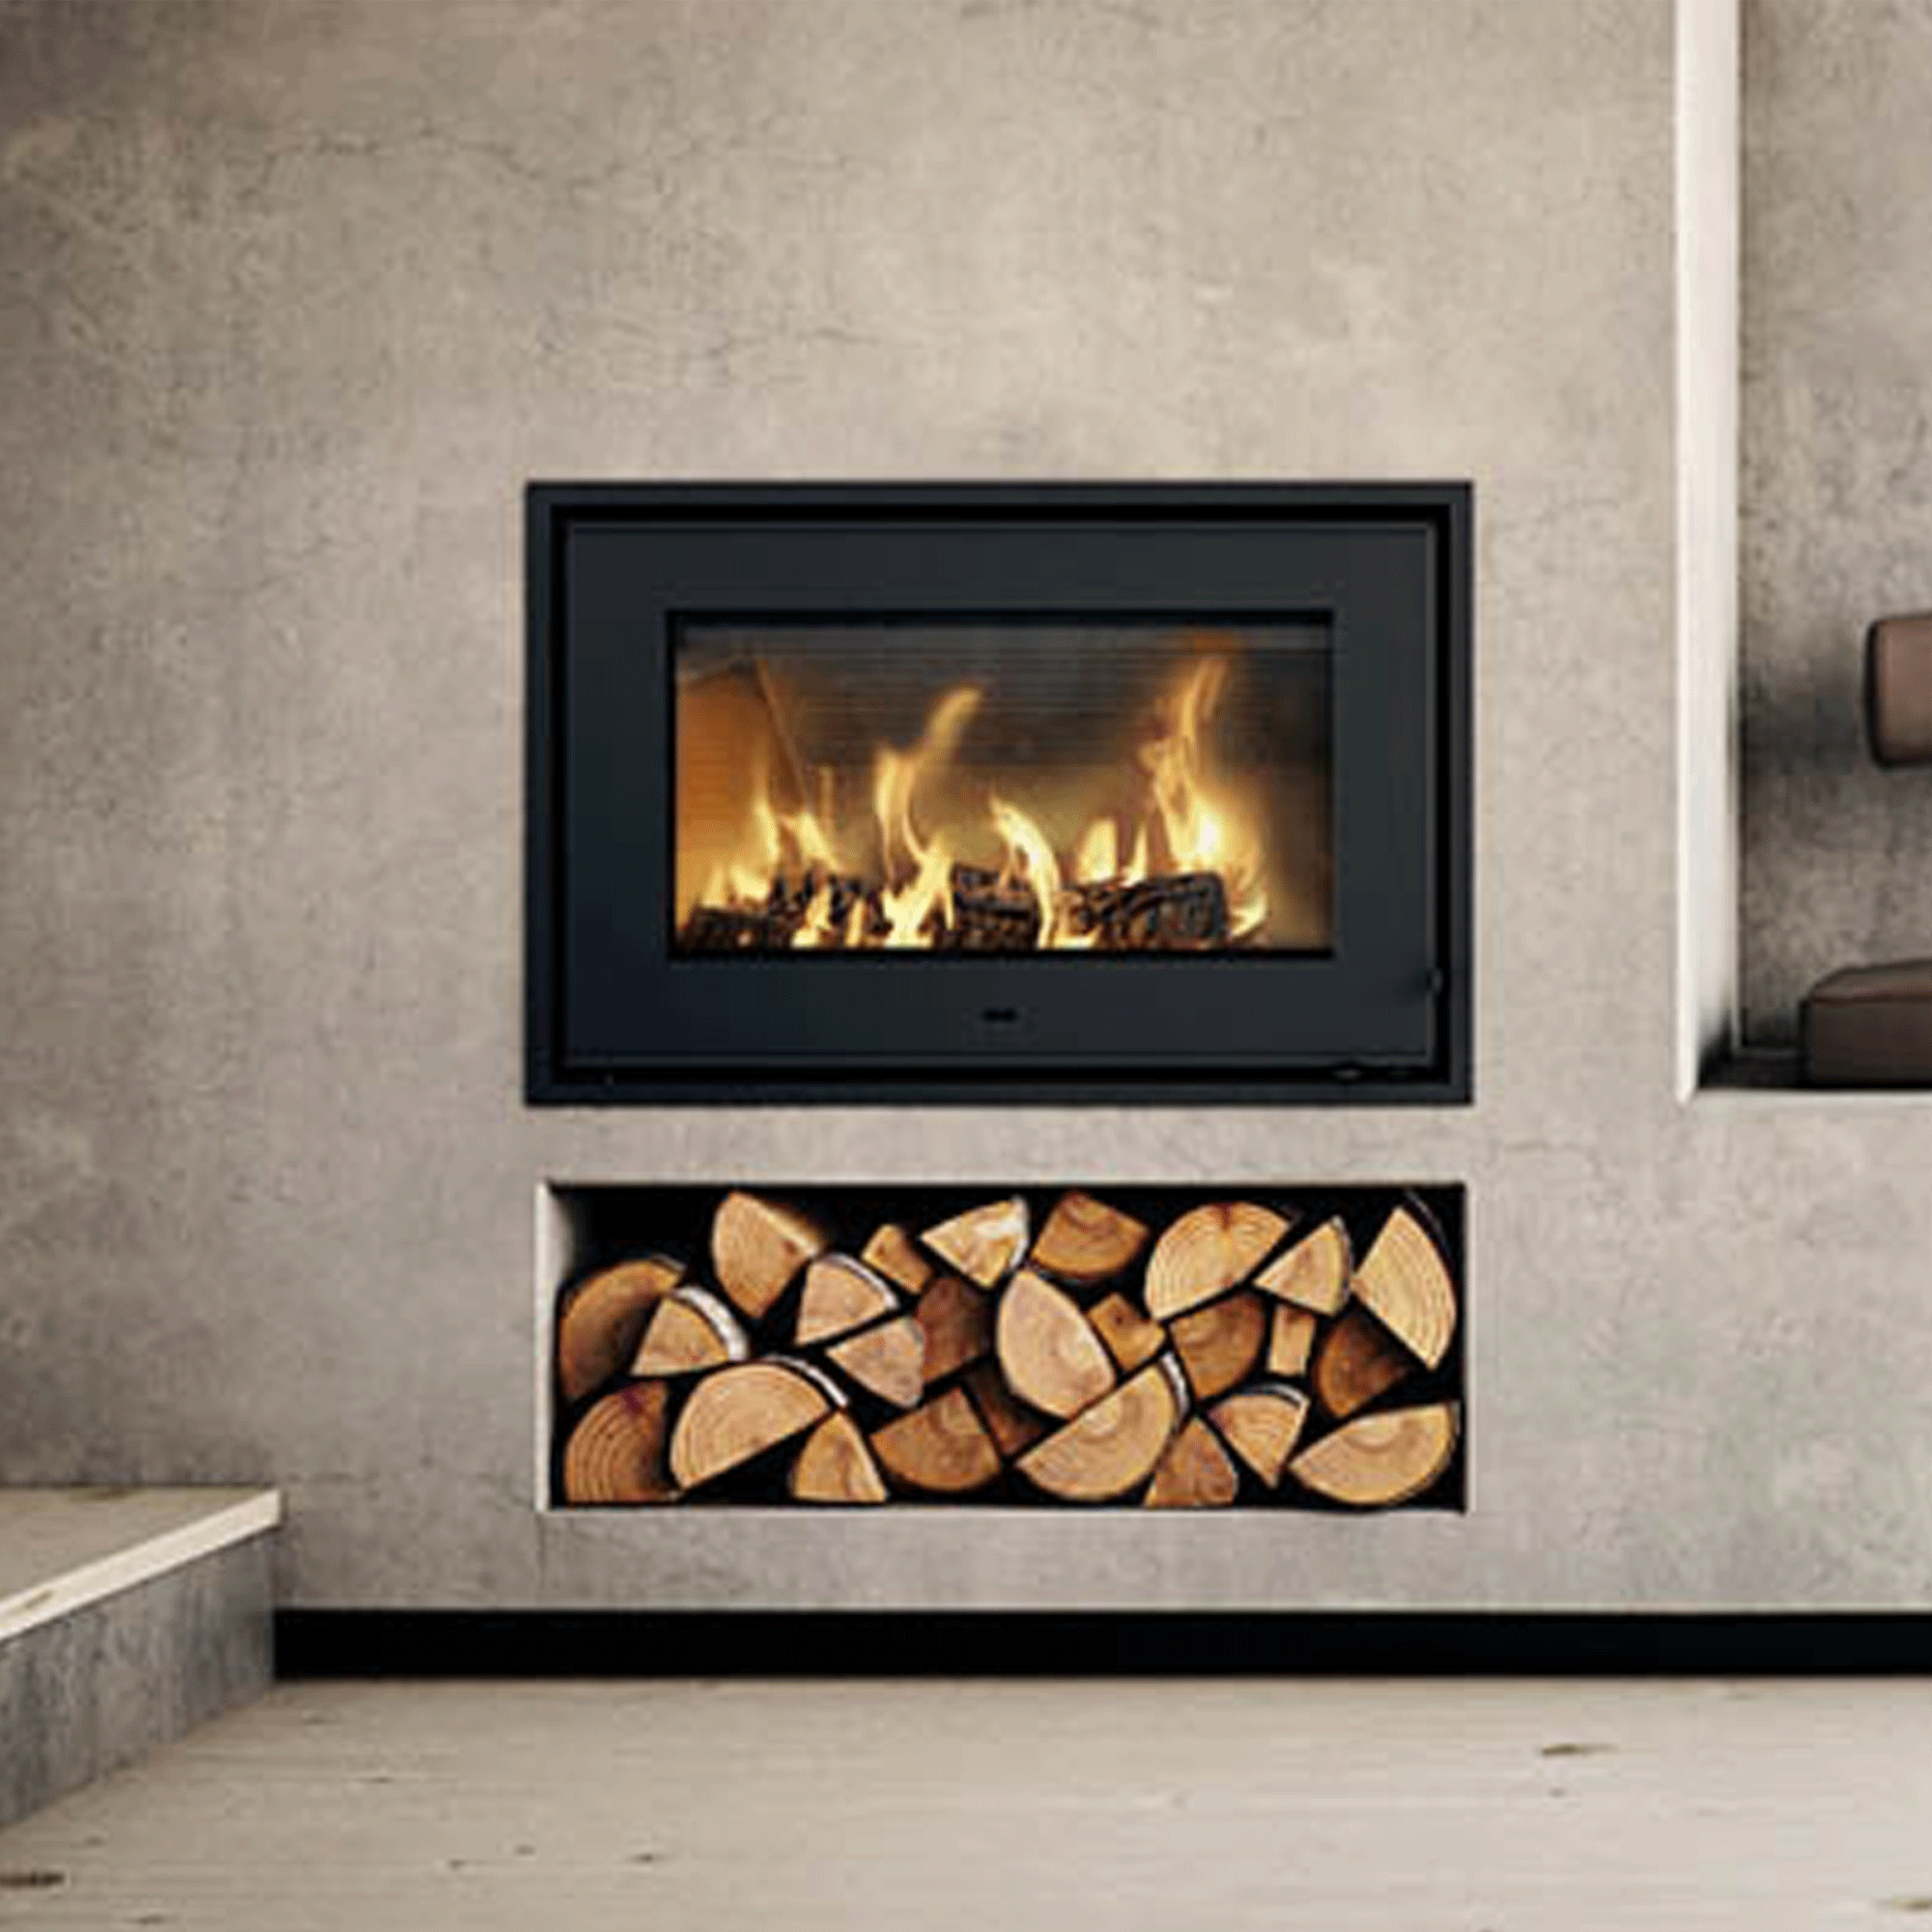 Gas Fireplace Units Best Of Pin by Manju On Home Decor Ideas In 2019